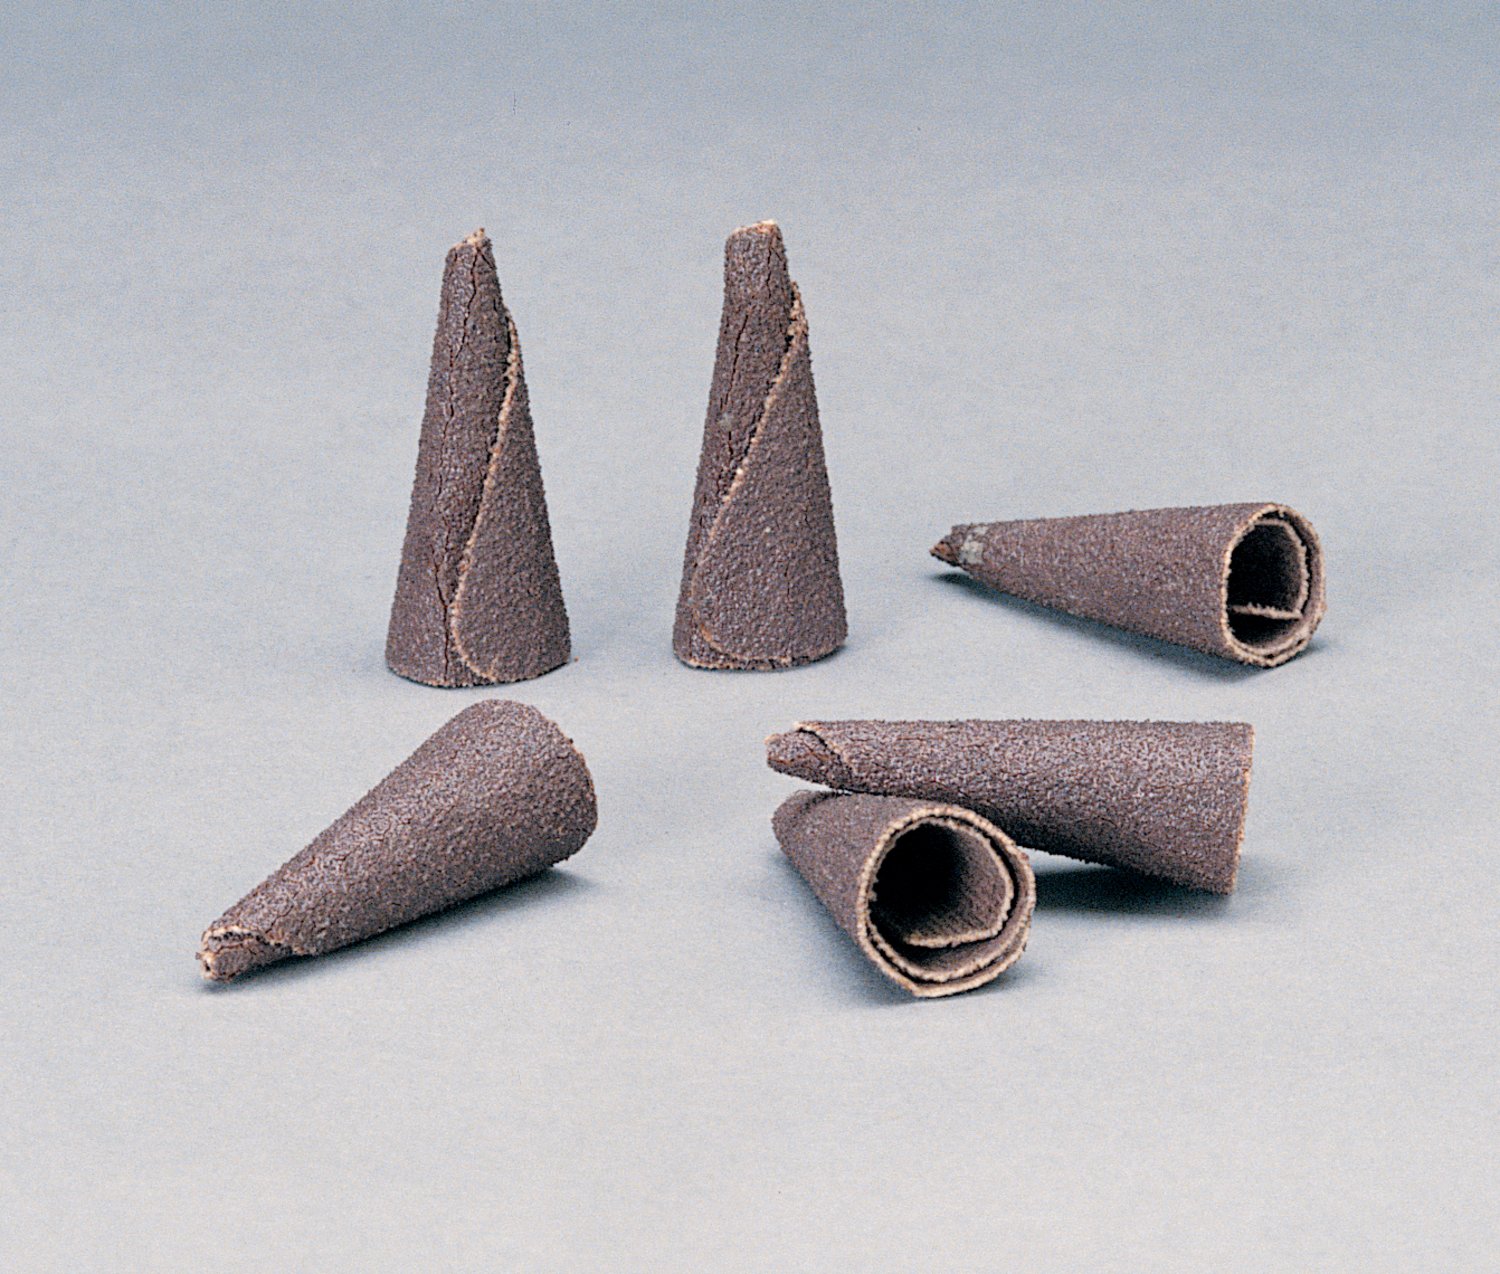 7010368591 - Standard Abrasives Aluminum Oxide Tapered Cone Point, 709966, B-20 180, 100 ea/Case